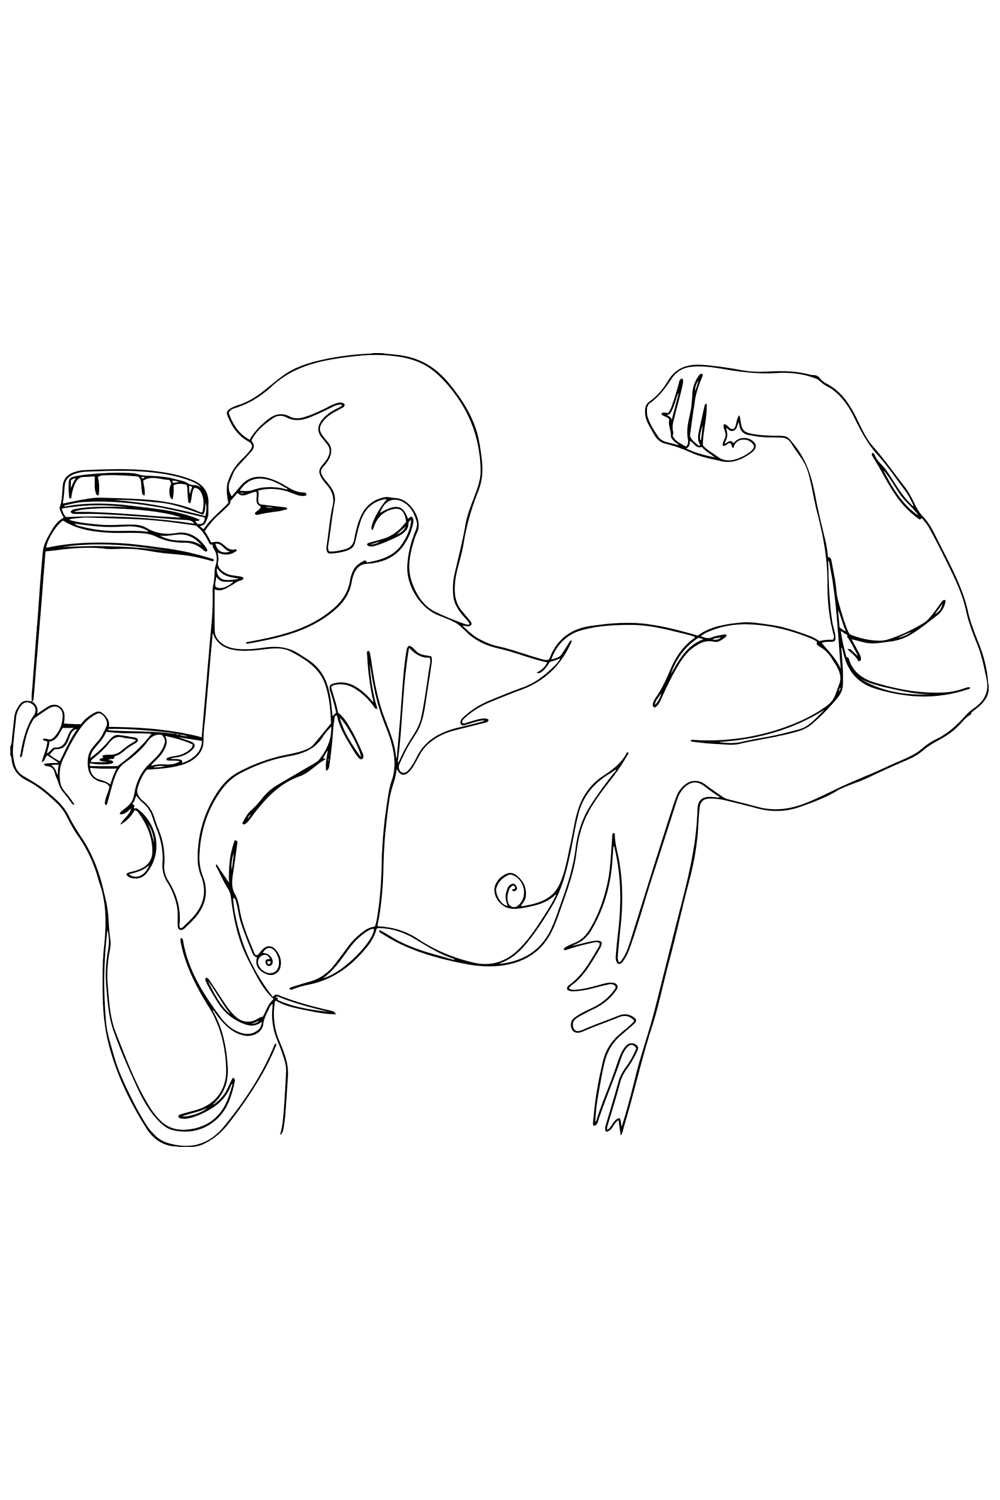 Fitness Romance: Cartoon Sketch of Muscular Man's Affectionate Kiss to Protein Jar, Love for Fitness Fuel: Sketch Drawing of Muscular Man Kissing Protein Powder Jar, Fit man vector pinterest preview image.